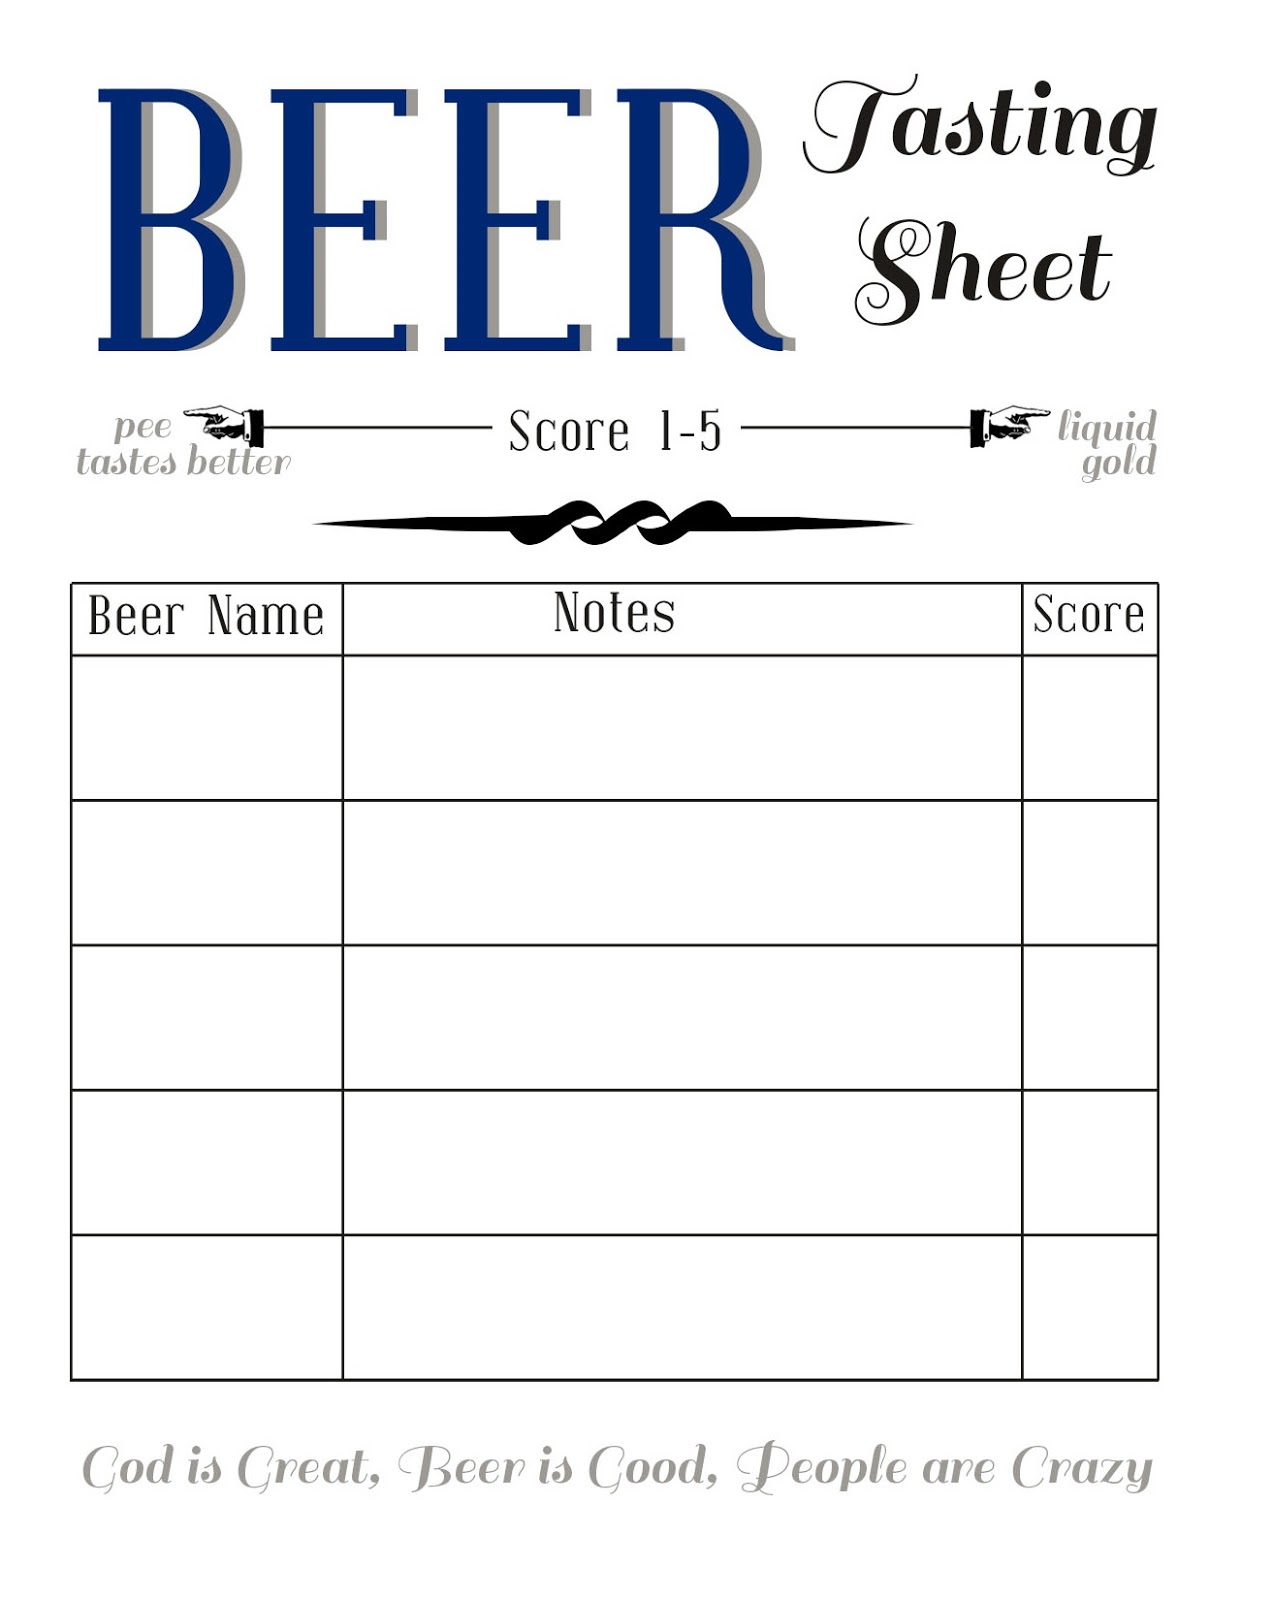 beer-rating-sheet-bacon-beer-tasting-party-pinterest